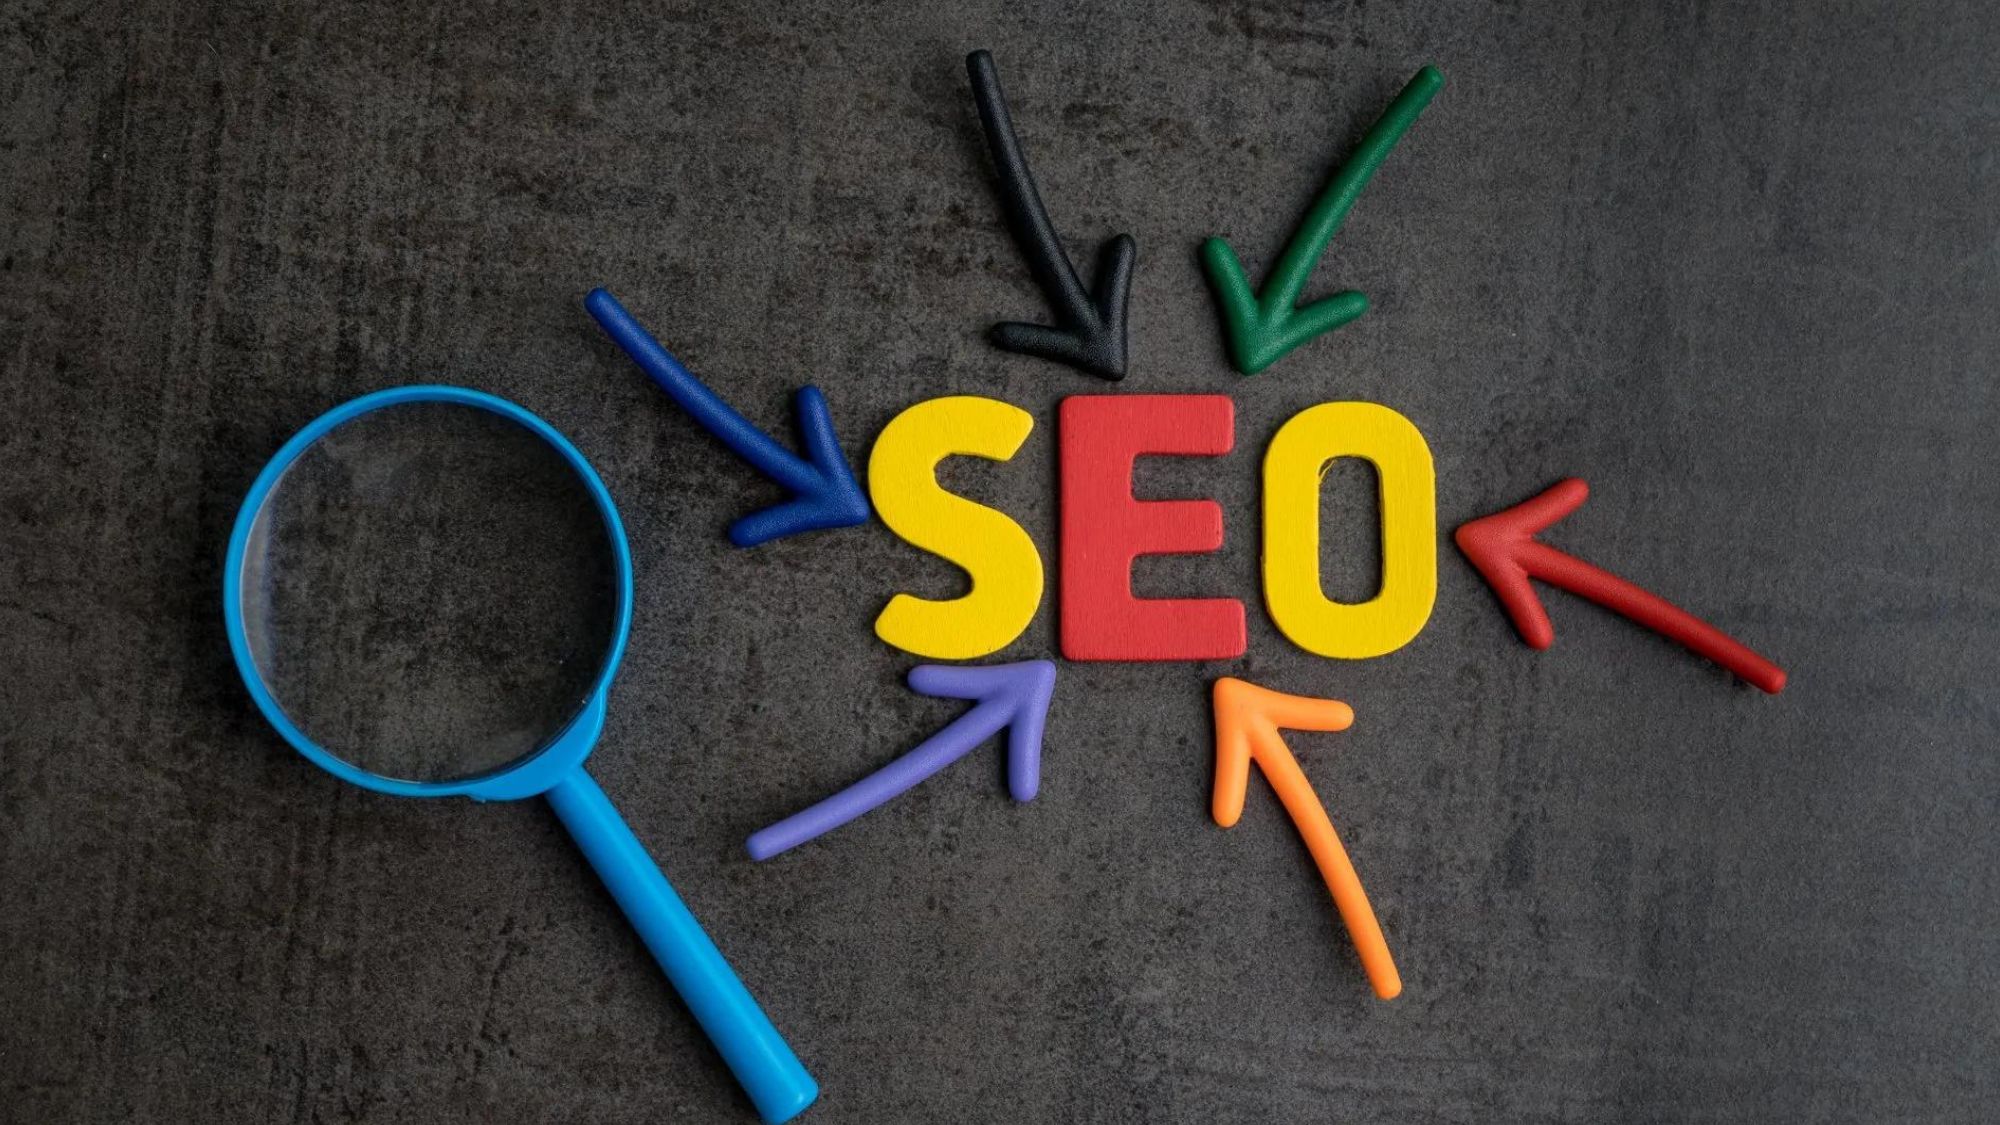 SEO image symbolizing dos and don'ts of website design